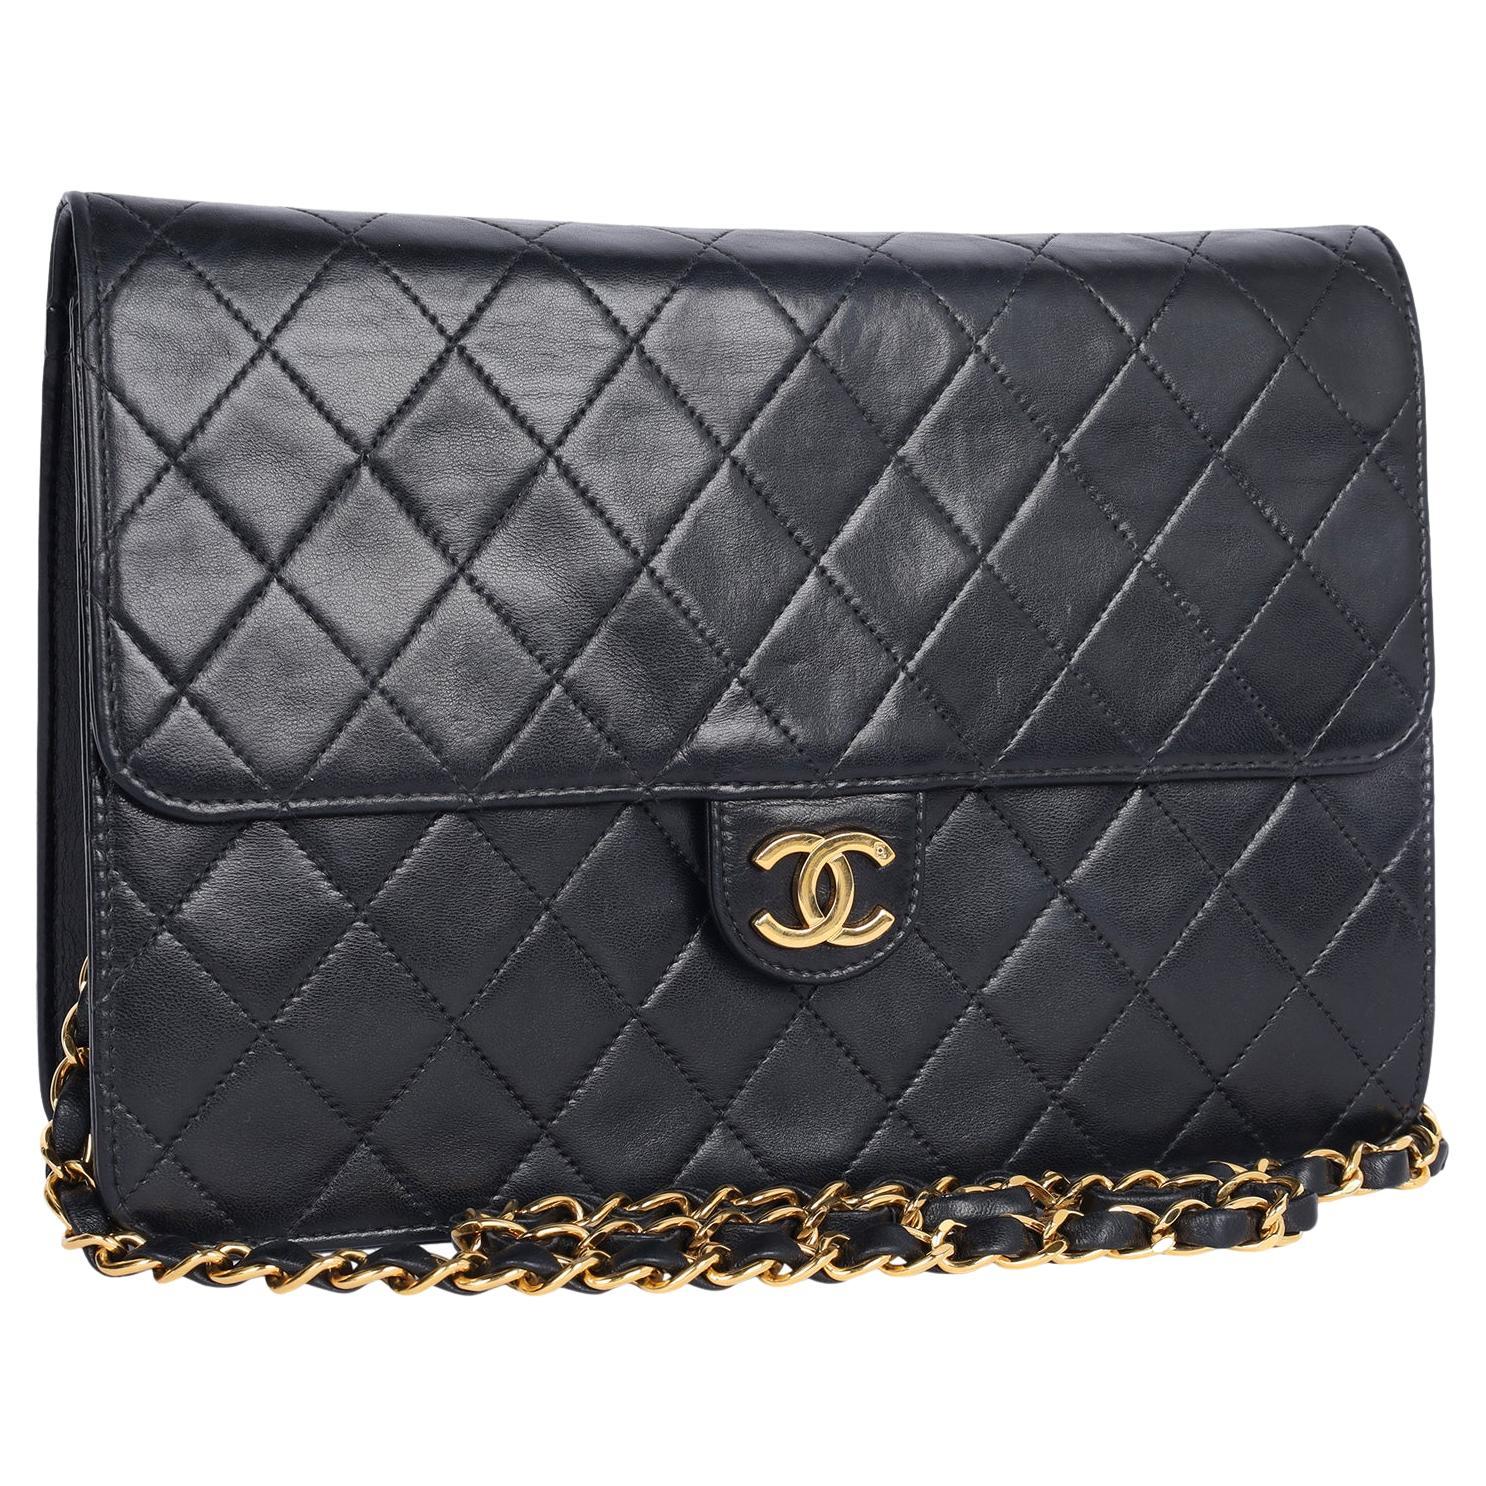 Chanel Black Classic Front Flap Quilted Leather Shoulder Bag For Sale